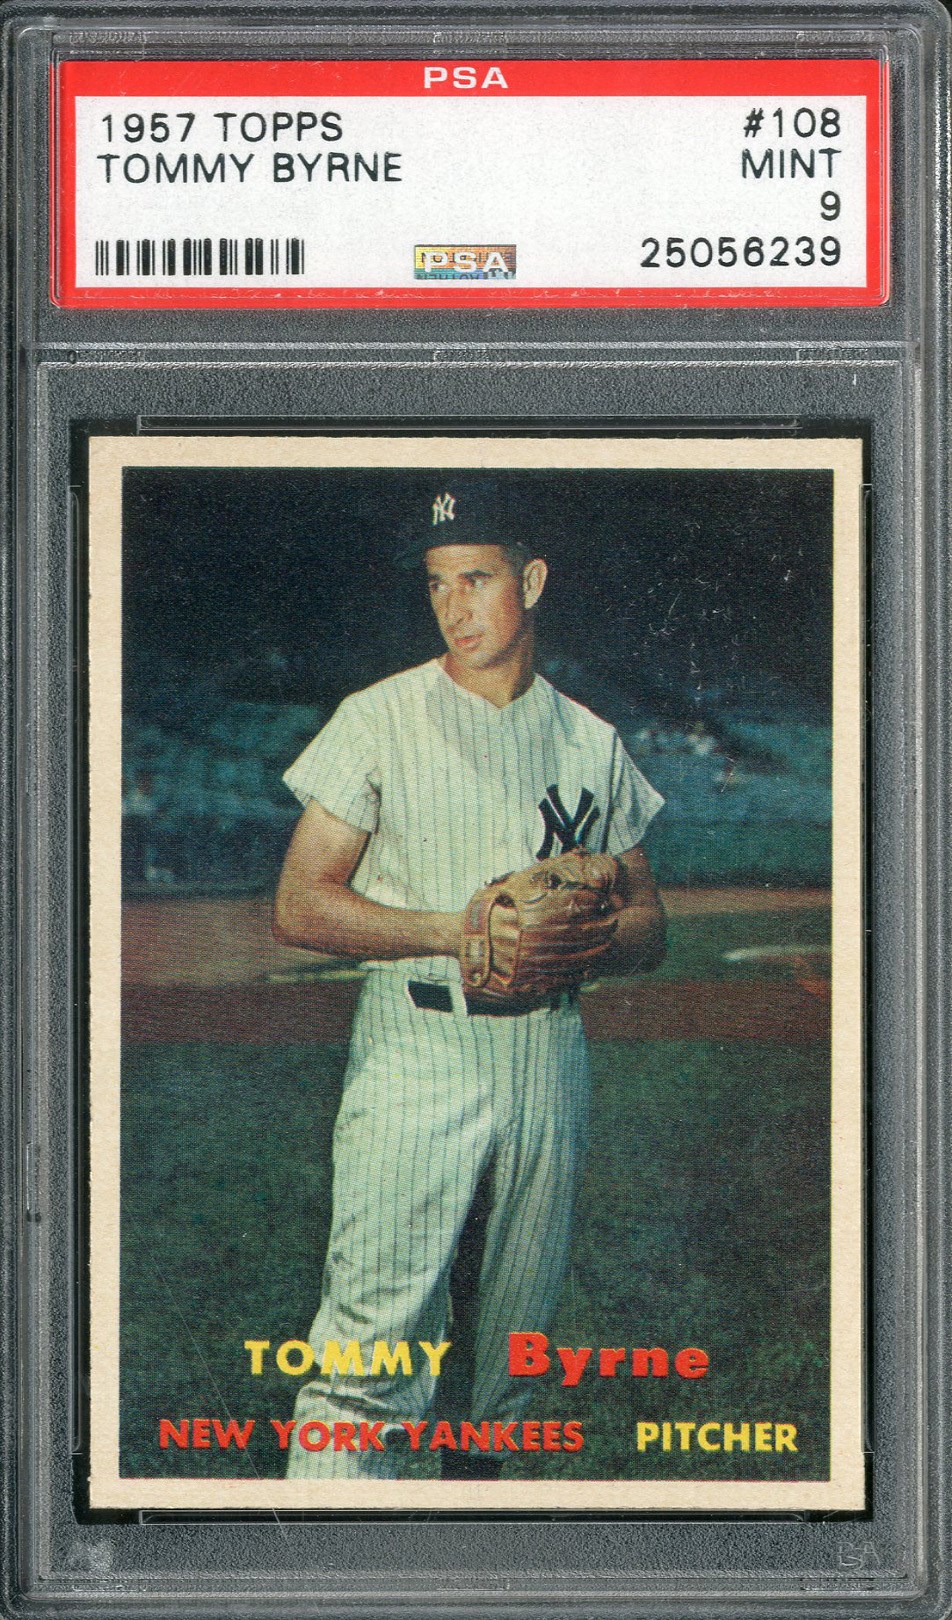 Baseball and Trading Cards - 1957 Topps #108 Tommy Byrne PSA MINT 9